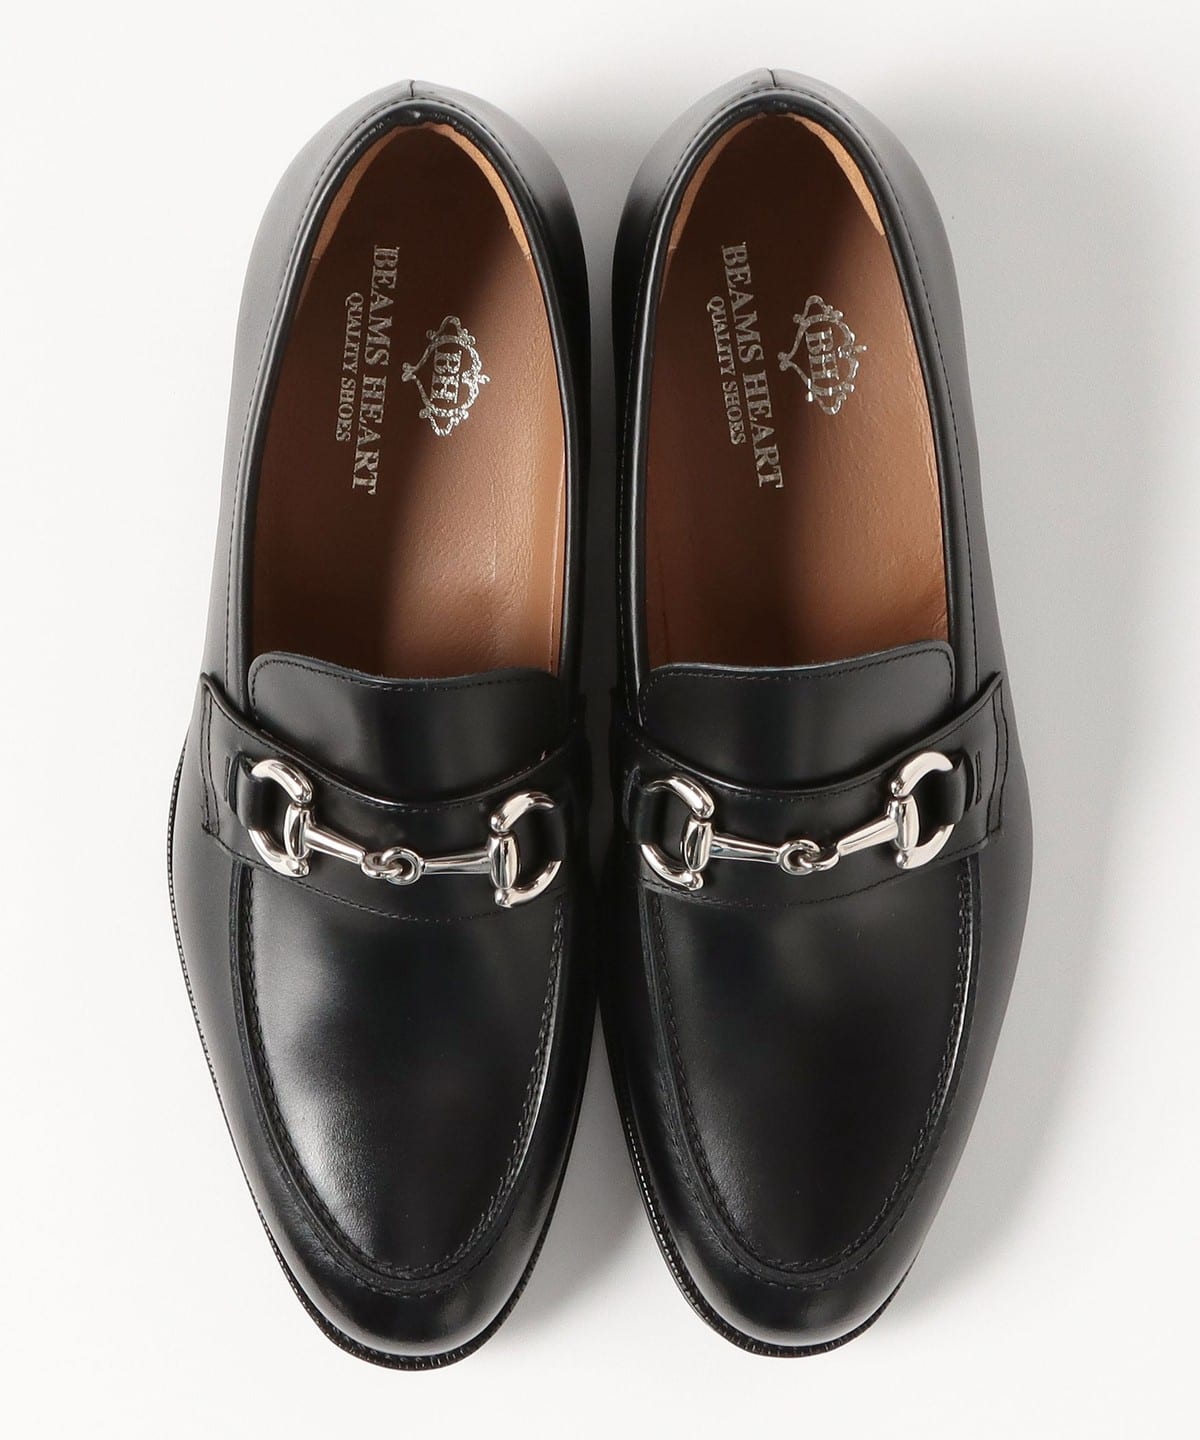 BEAMS HEART BEAMS HEART BEAMS HEART / Bit loafers (shoes loafers 